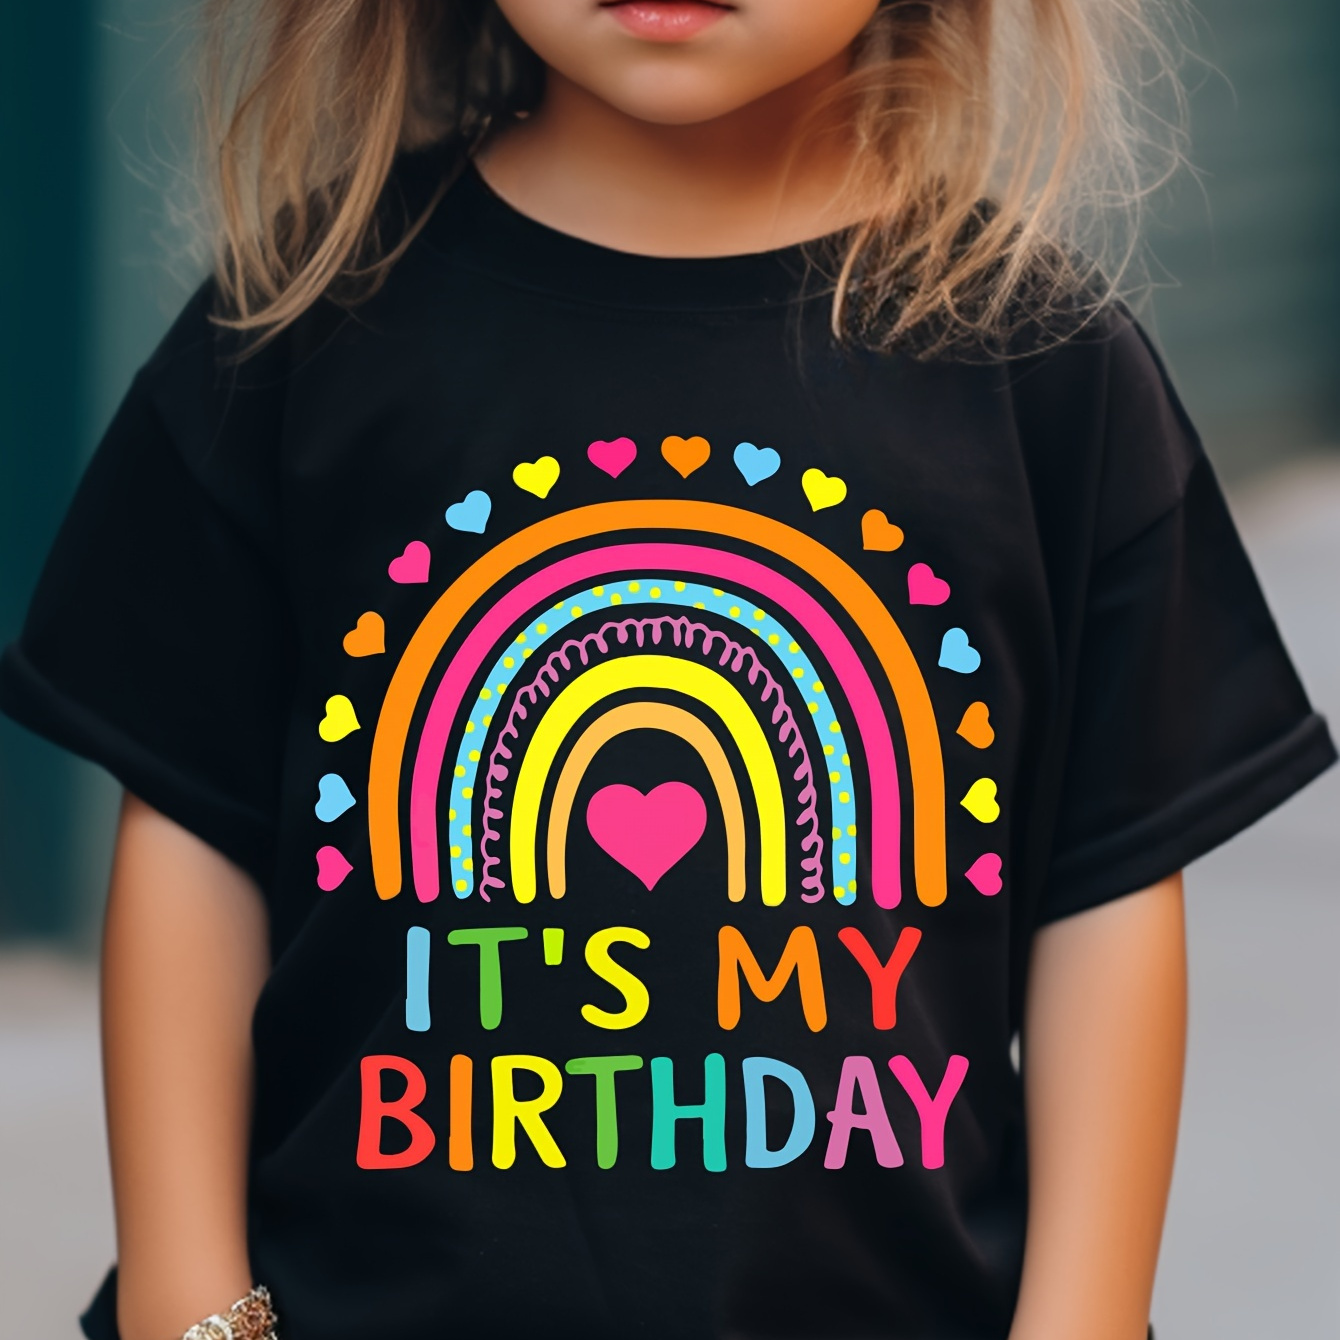 

It's My Birthday & Doodled Rainbow & Heart Graphic Print, Girls' Casual & Comfy Crew Neck Short Sleeve T-shirt For Spring & Summer, Girls' Tee & Clothes For Outdoor Activities